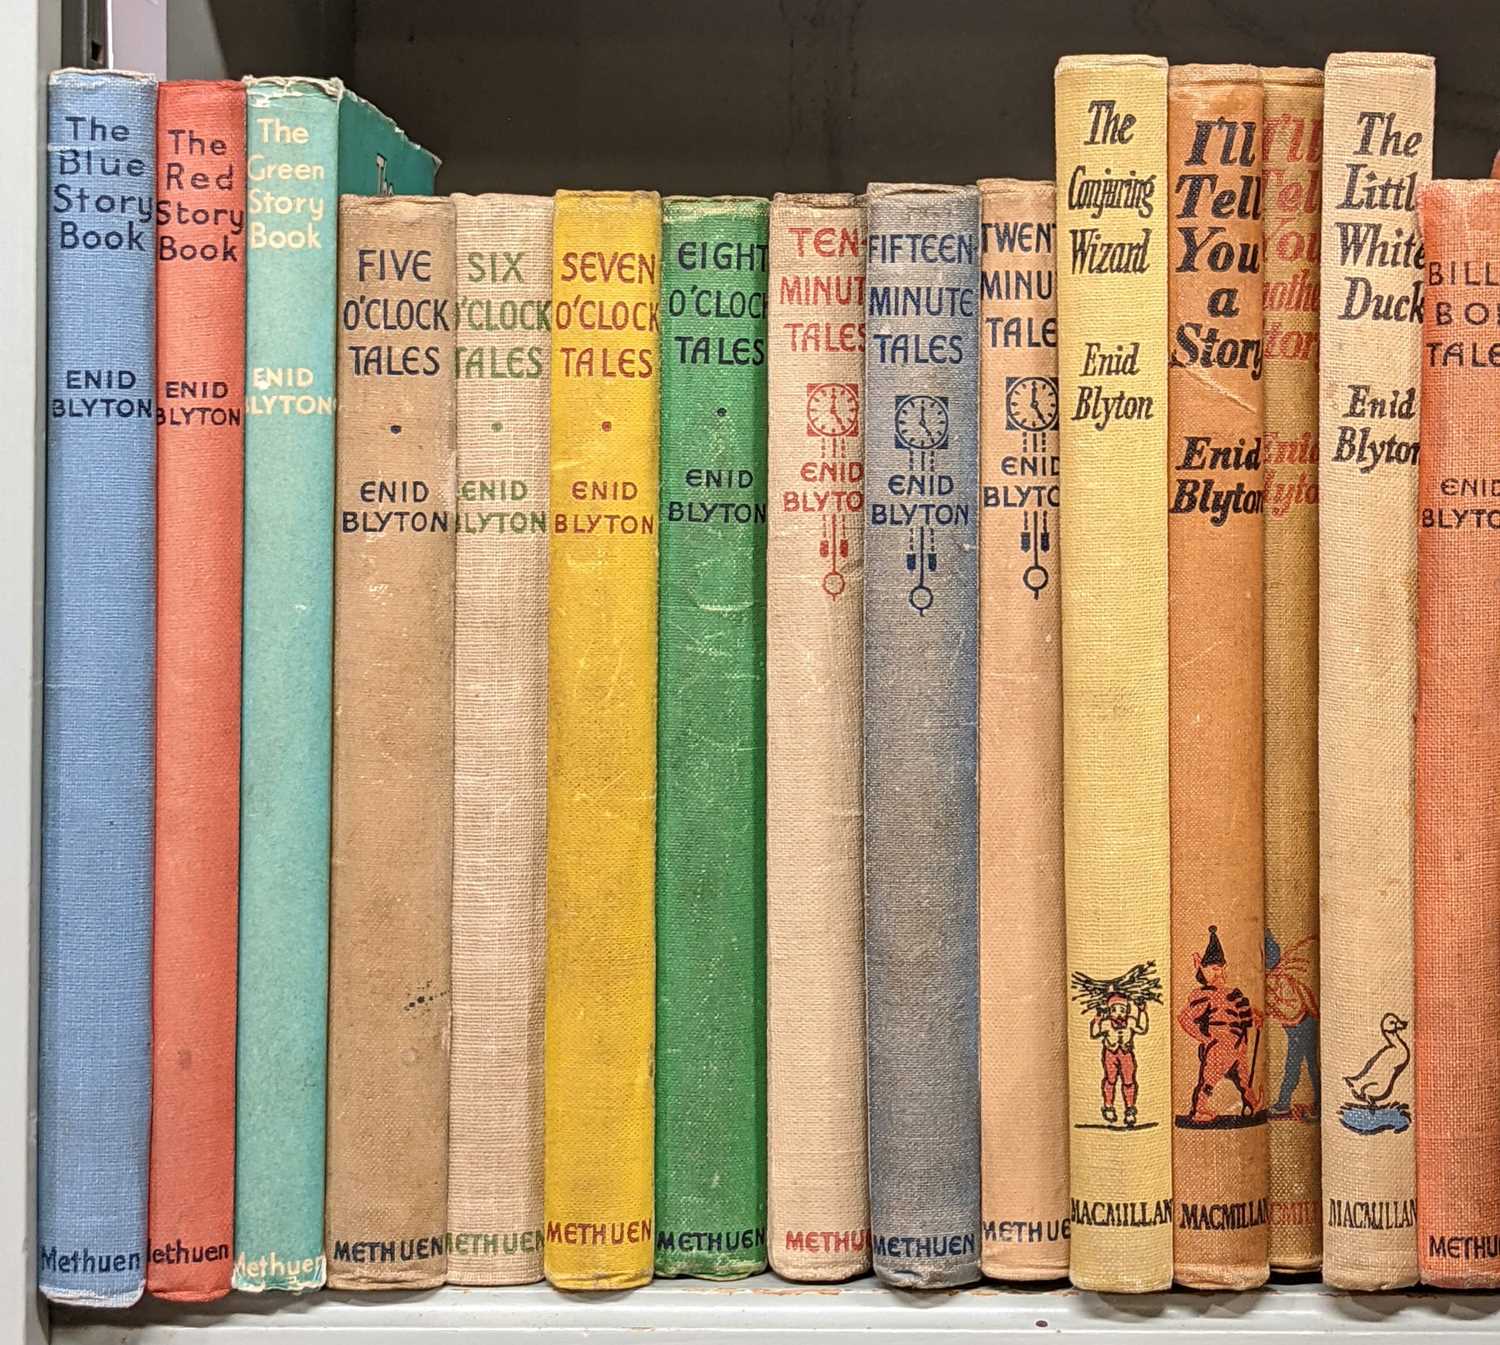 Lot 465 - Blyton (Enid). The Blue, Red & Green Story Books, 1st editions, inscribed by the author, and others